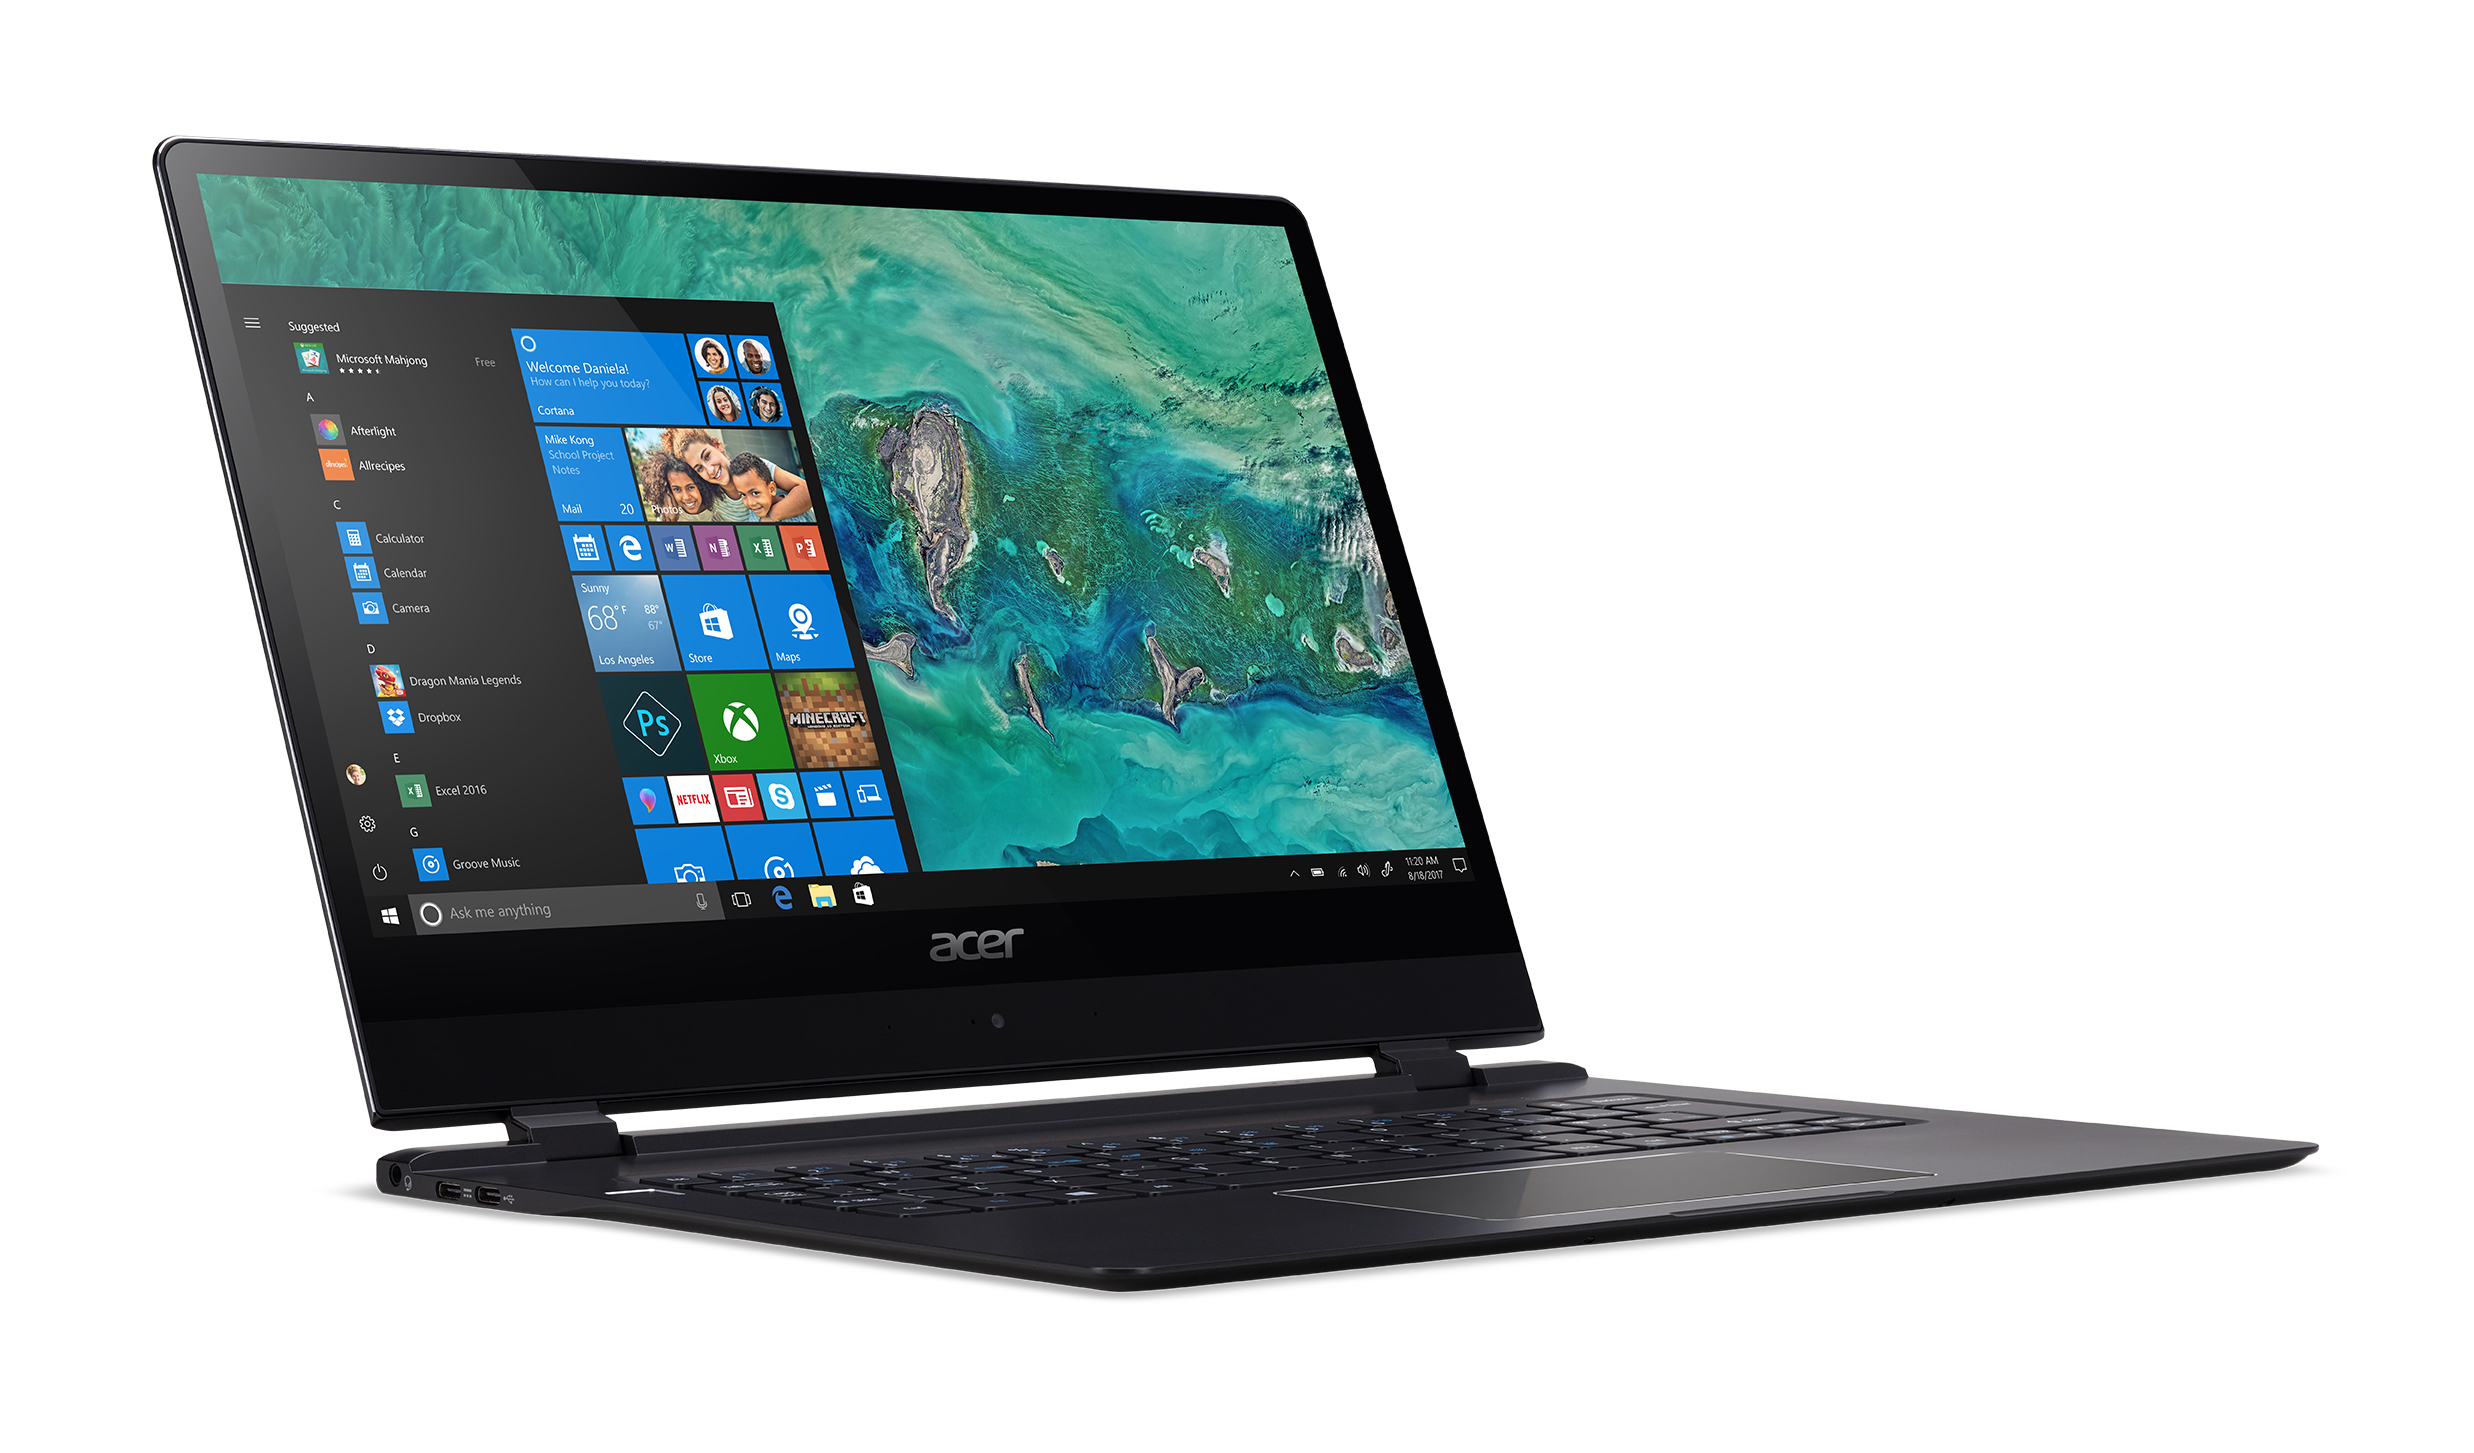 Acer says its Swift 7, unveiled at CES 2018, is the thinnest laptop in the world. (Courtesy of Acer)